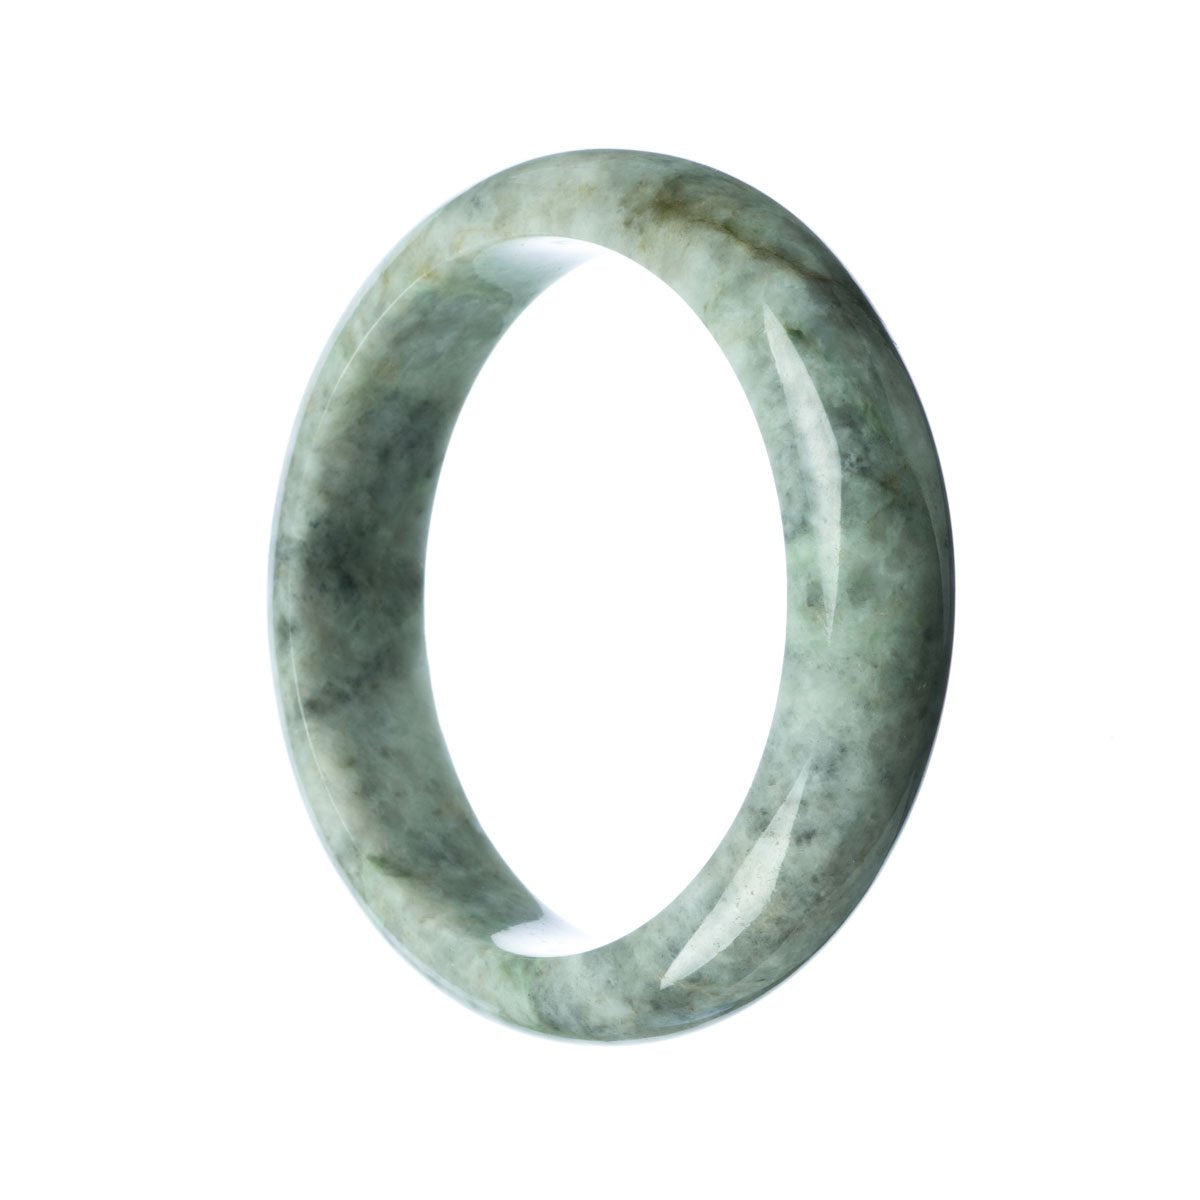 A close-up photo of a beautiful grey jade bracelet in the shape of a half moon, with a smooth and polished surface. The bracelet is made of high-quality Grade A grey jade and measures 59mm in diameter. The light reflects off the bracelet, showcasing its elegant and luxurious appearance. Perfect for adding a touch of sophistication to any outfit.